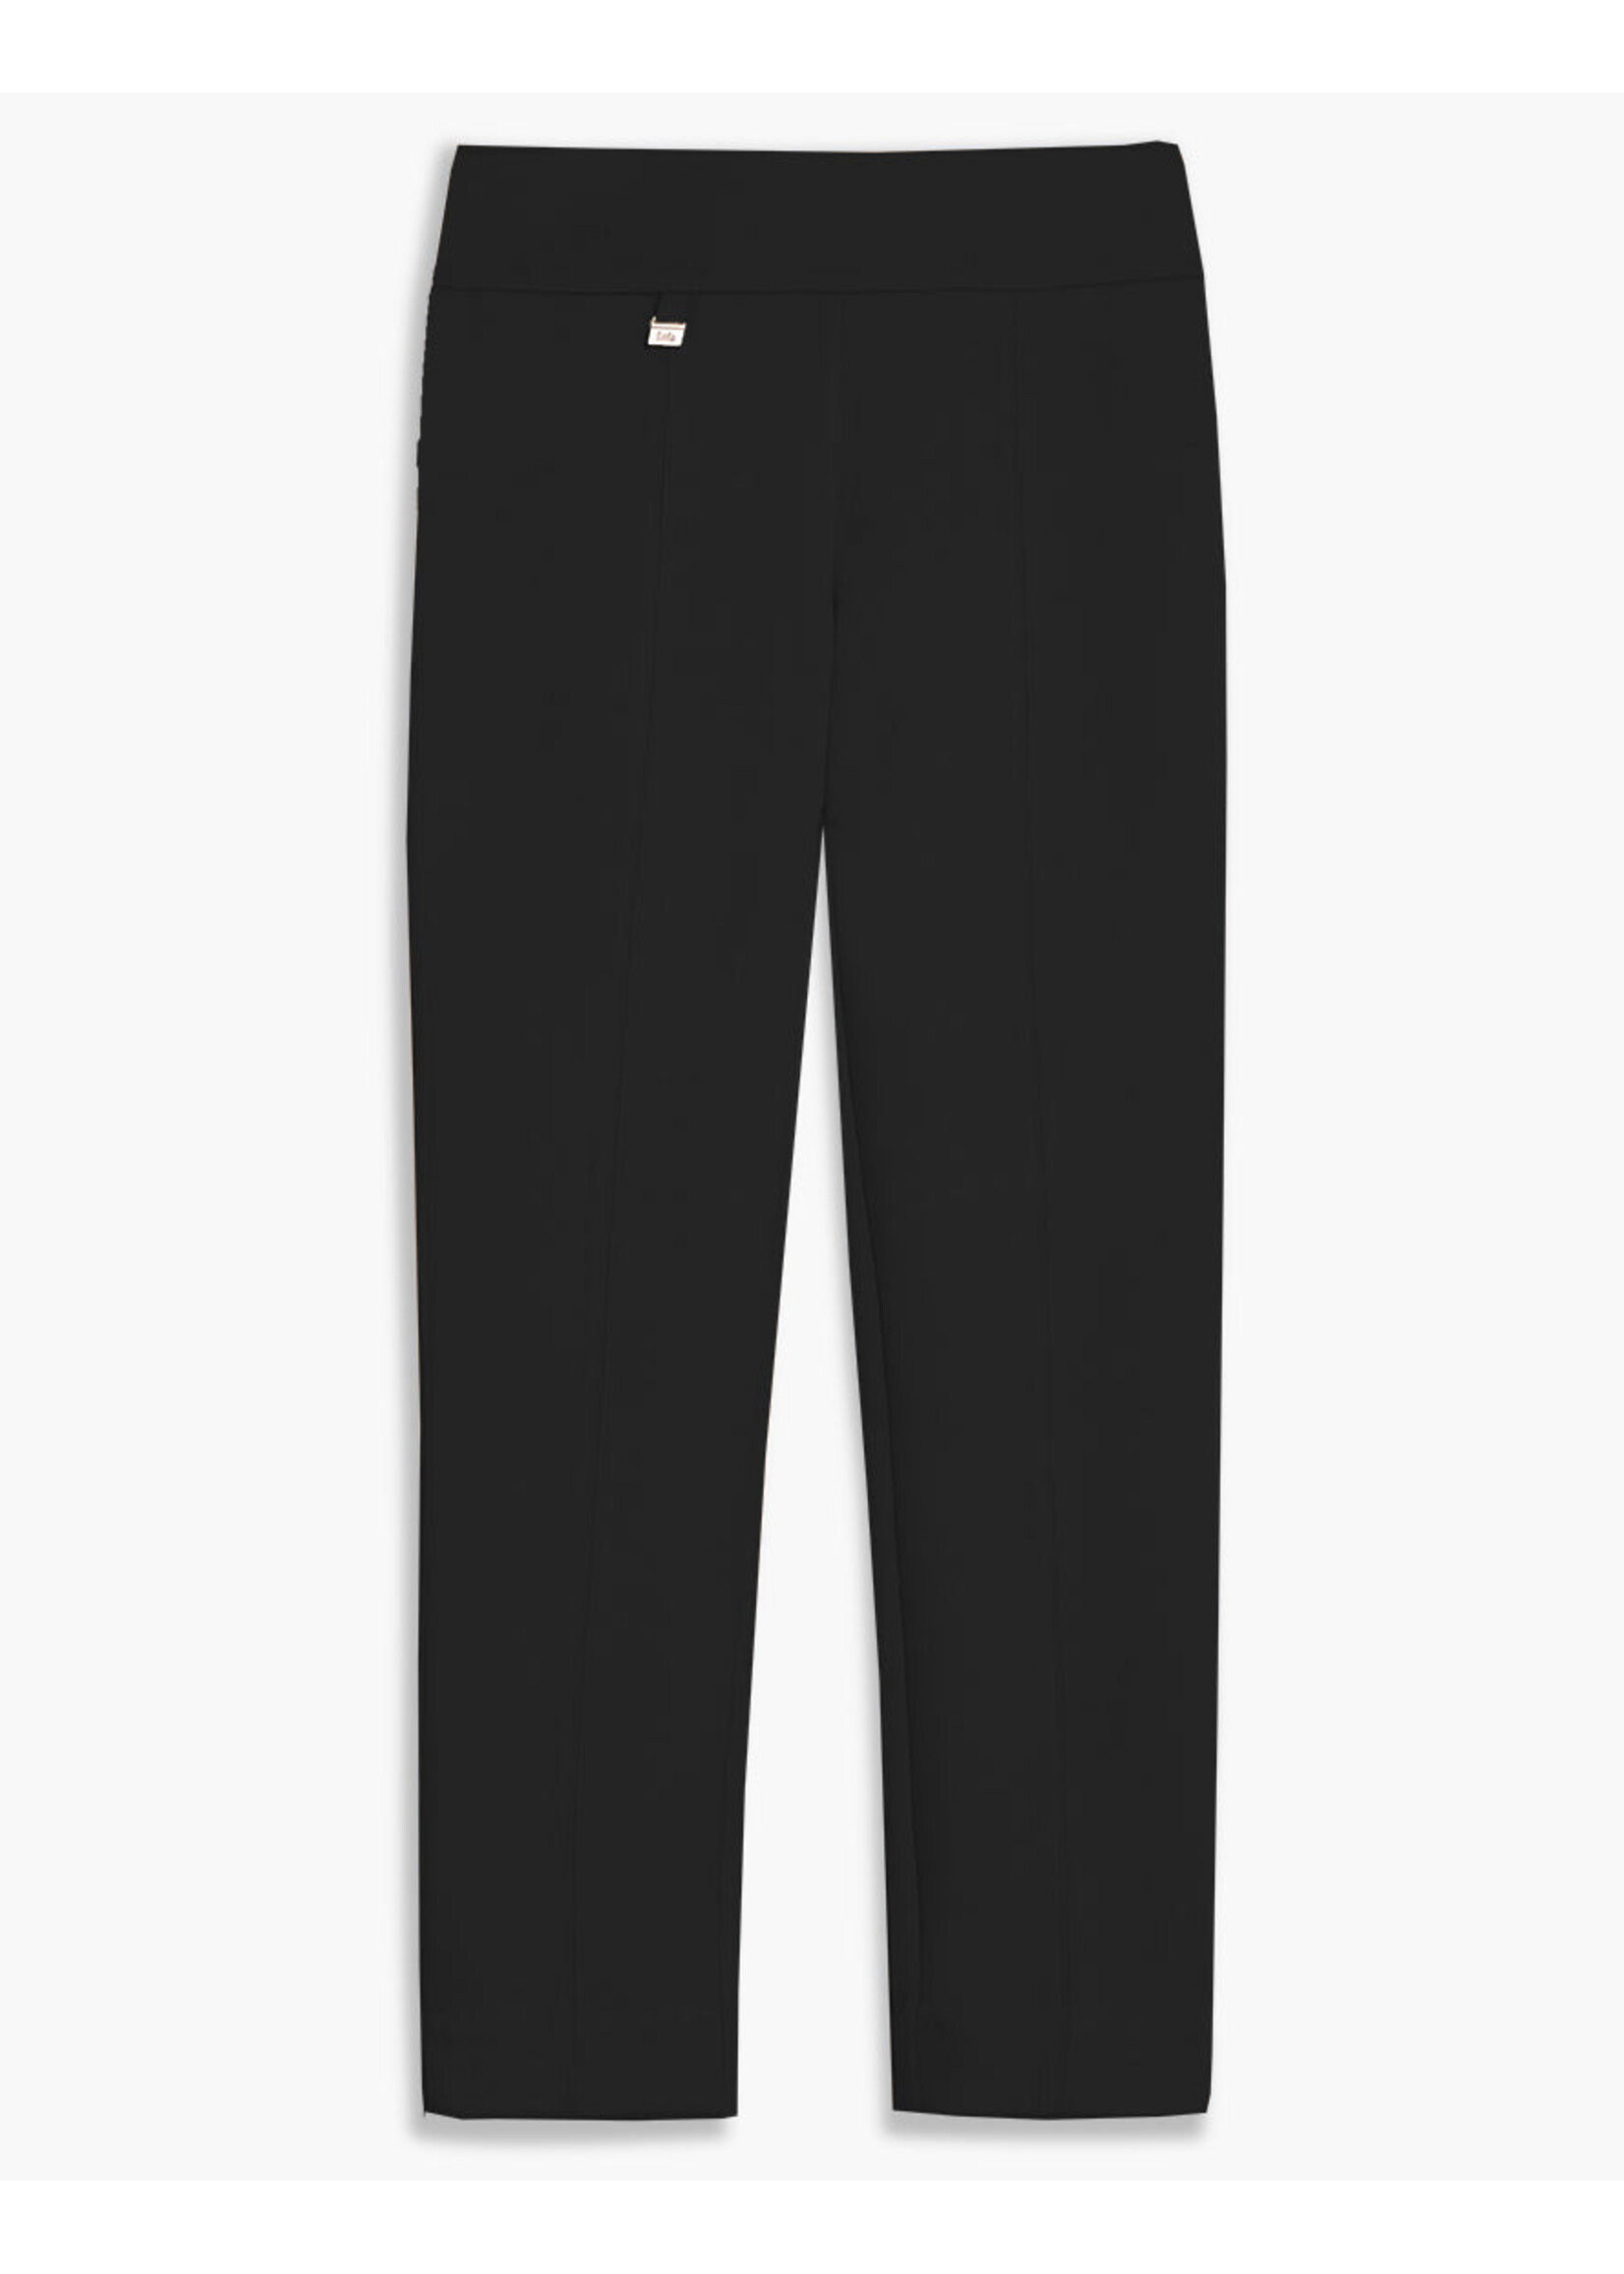 LOIS JEANS & JACKETS Women's pull-on suede pants